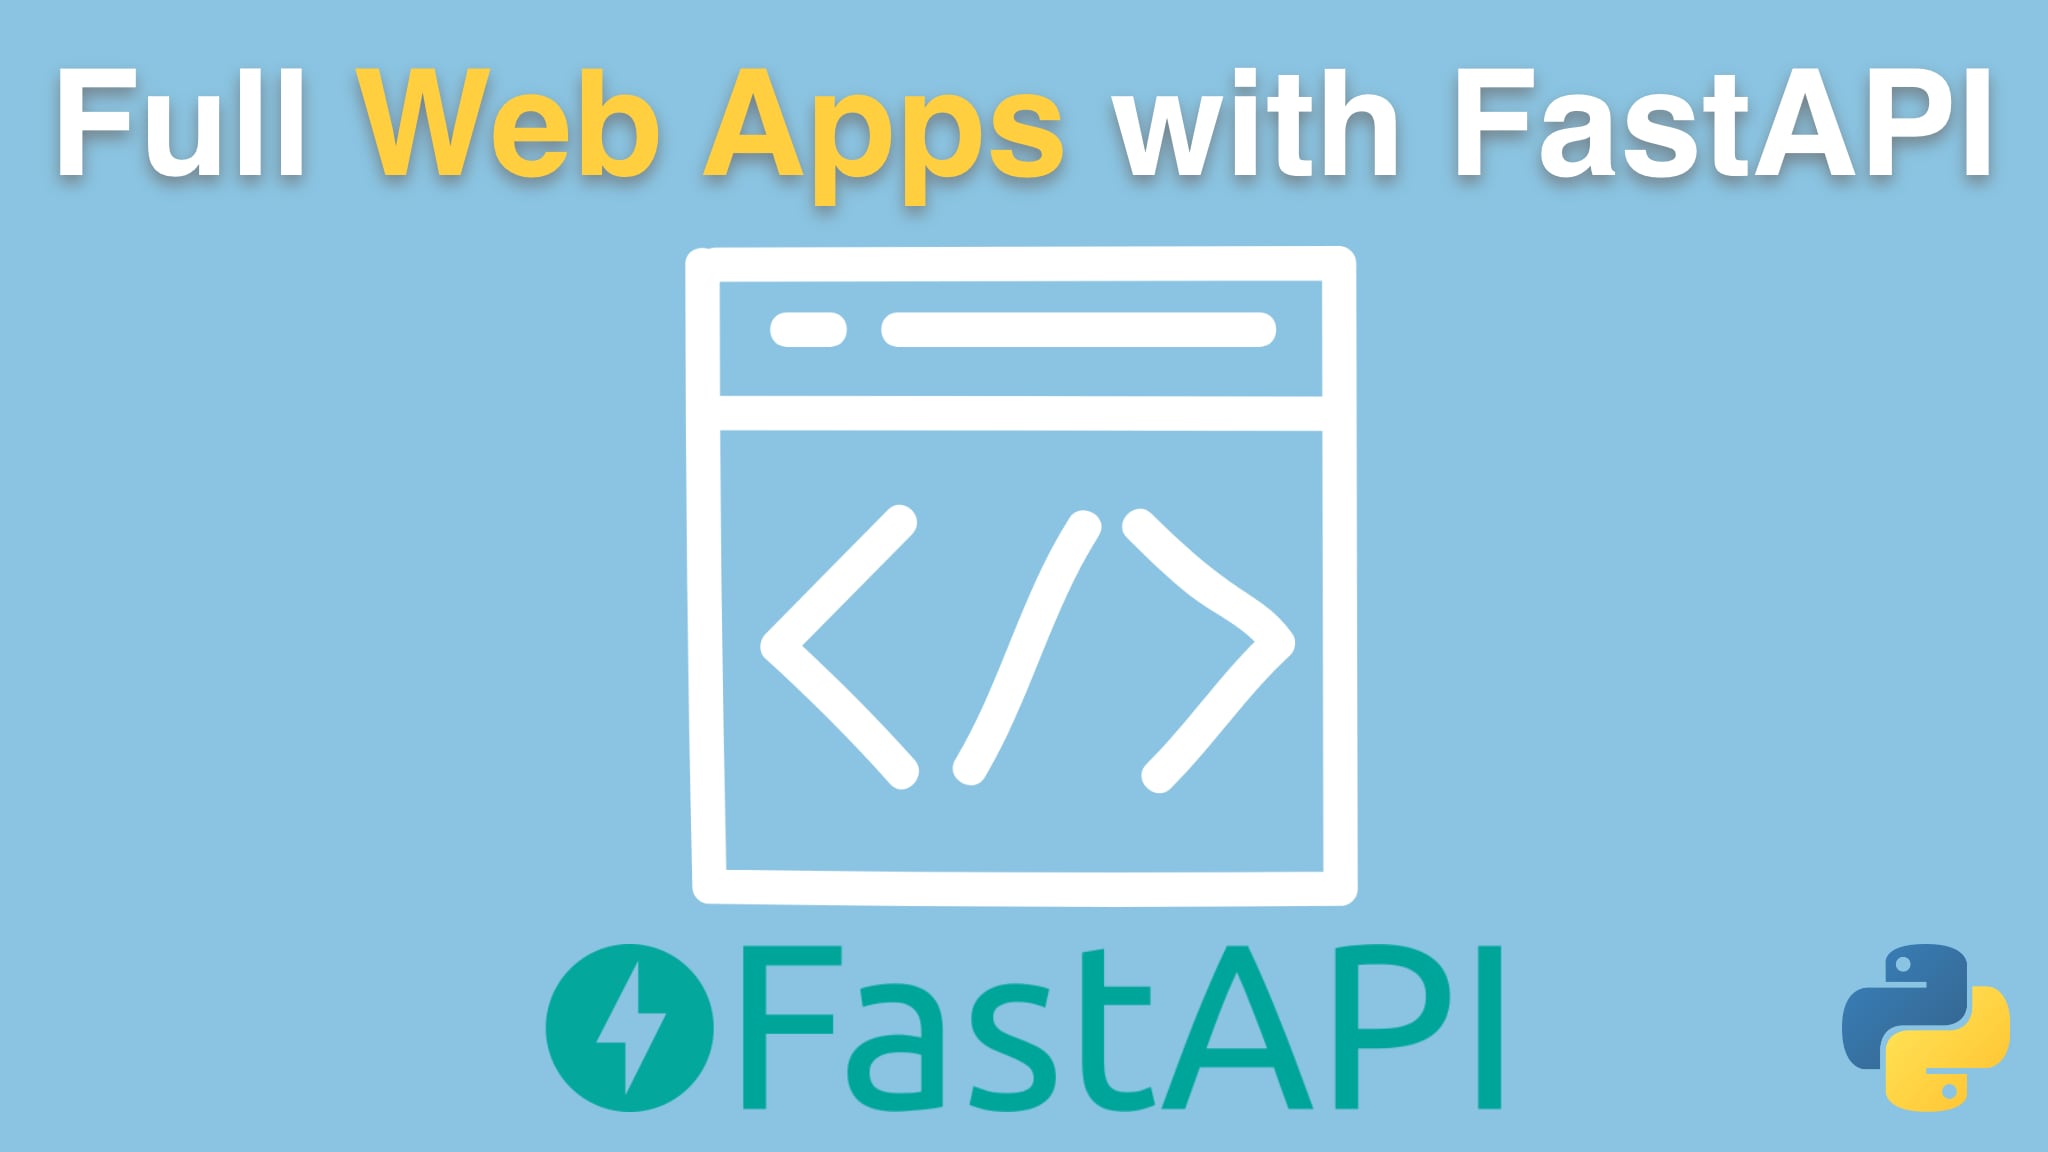 Course: Full Web Apps with FastAPI